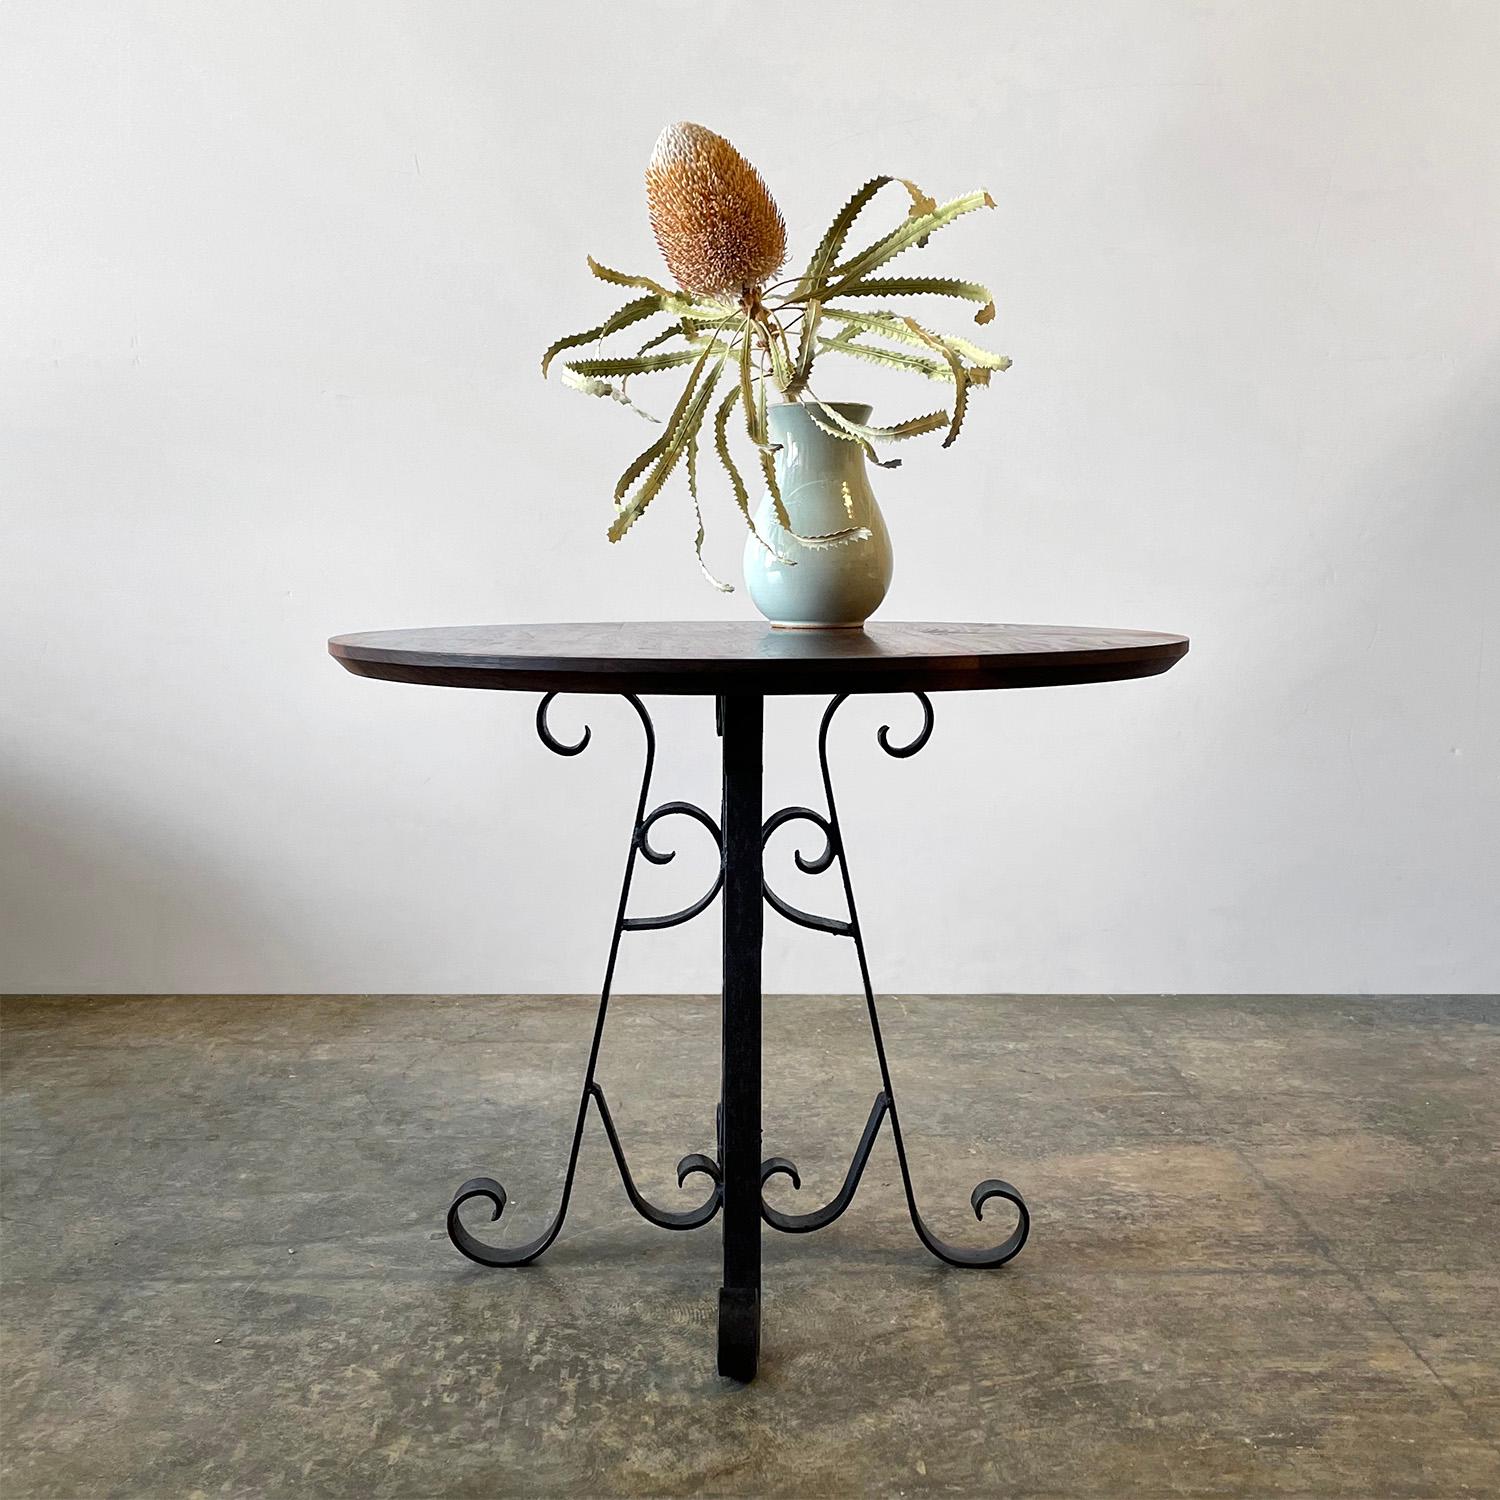 Rustic walnut side table with wrought iron base 
We love this rustic wonder as it’s the best of both worlds
Newly constructed solid walnut wood tabletop
Beautiful wood grain detail
Vintage sculpted wrought iron base
Patina from age and use

18.75